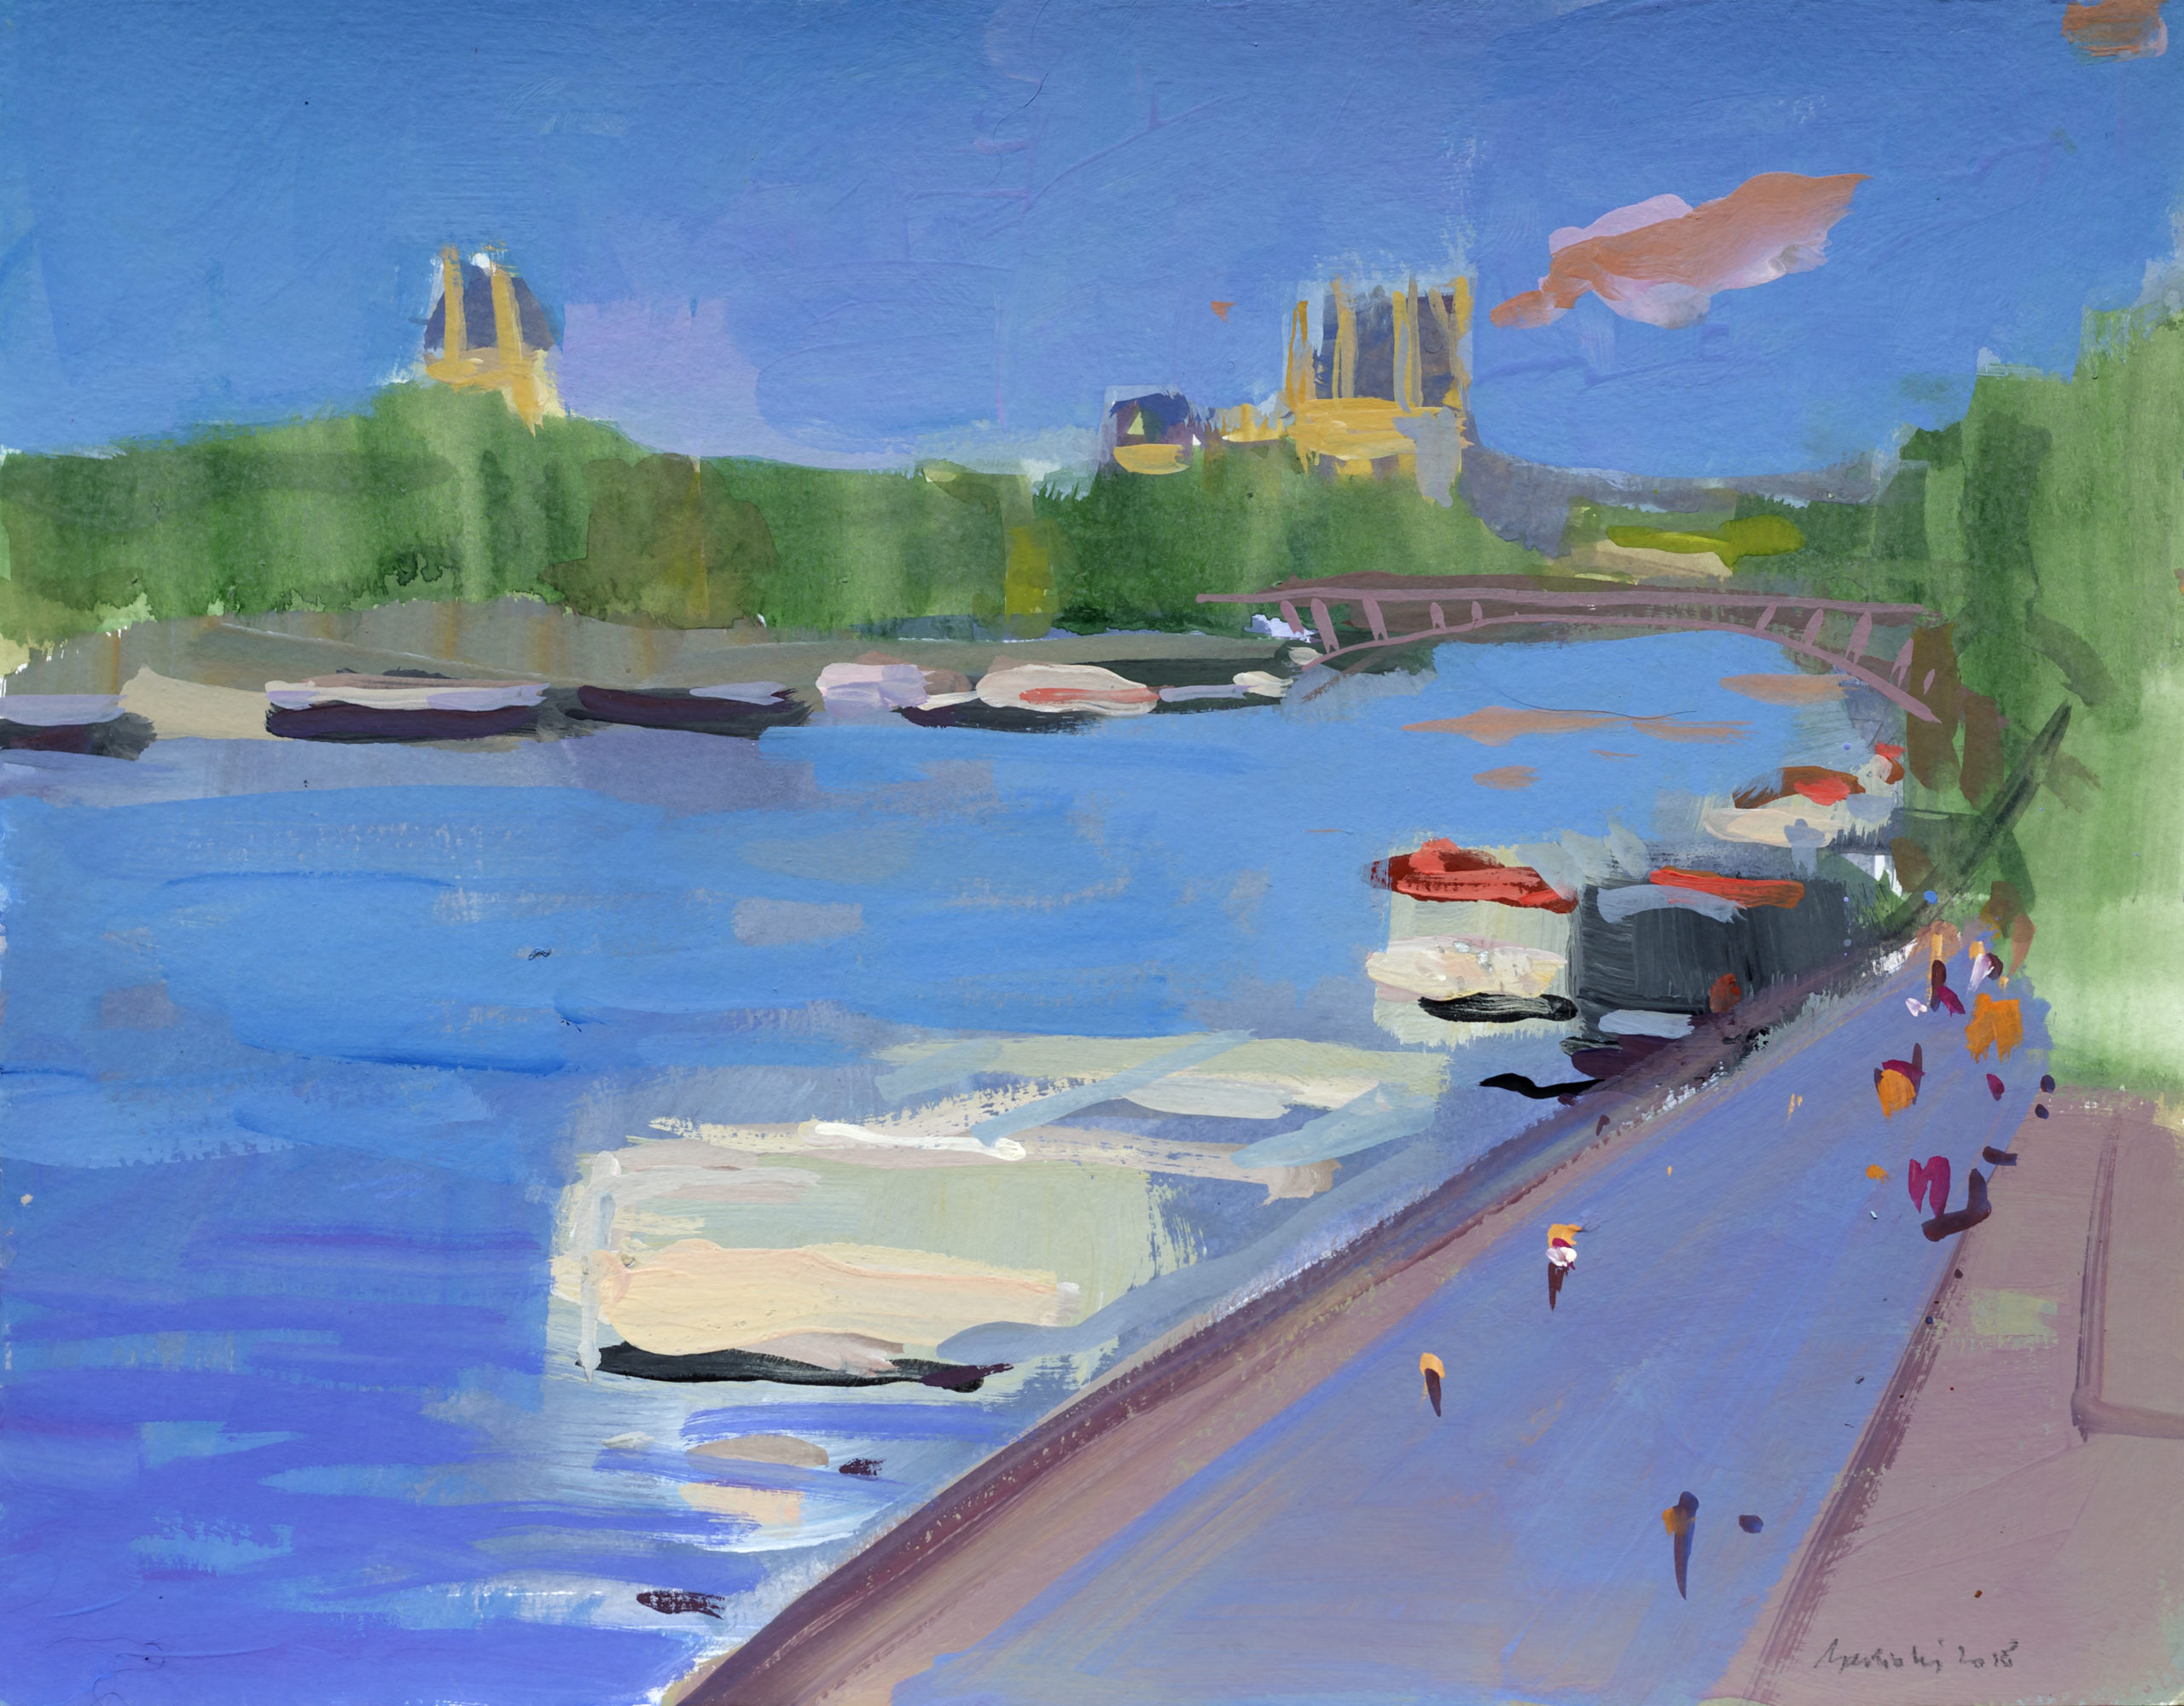 The plein Air Painting — The source of the french painter Bertrand